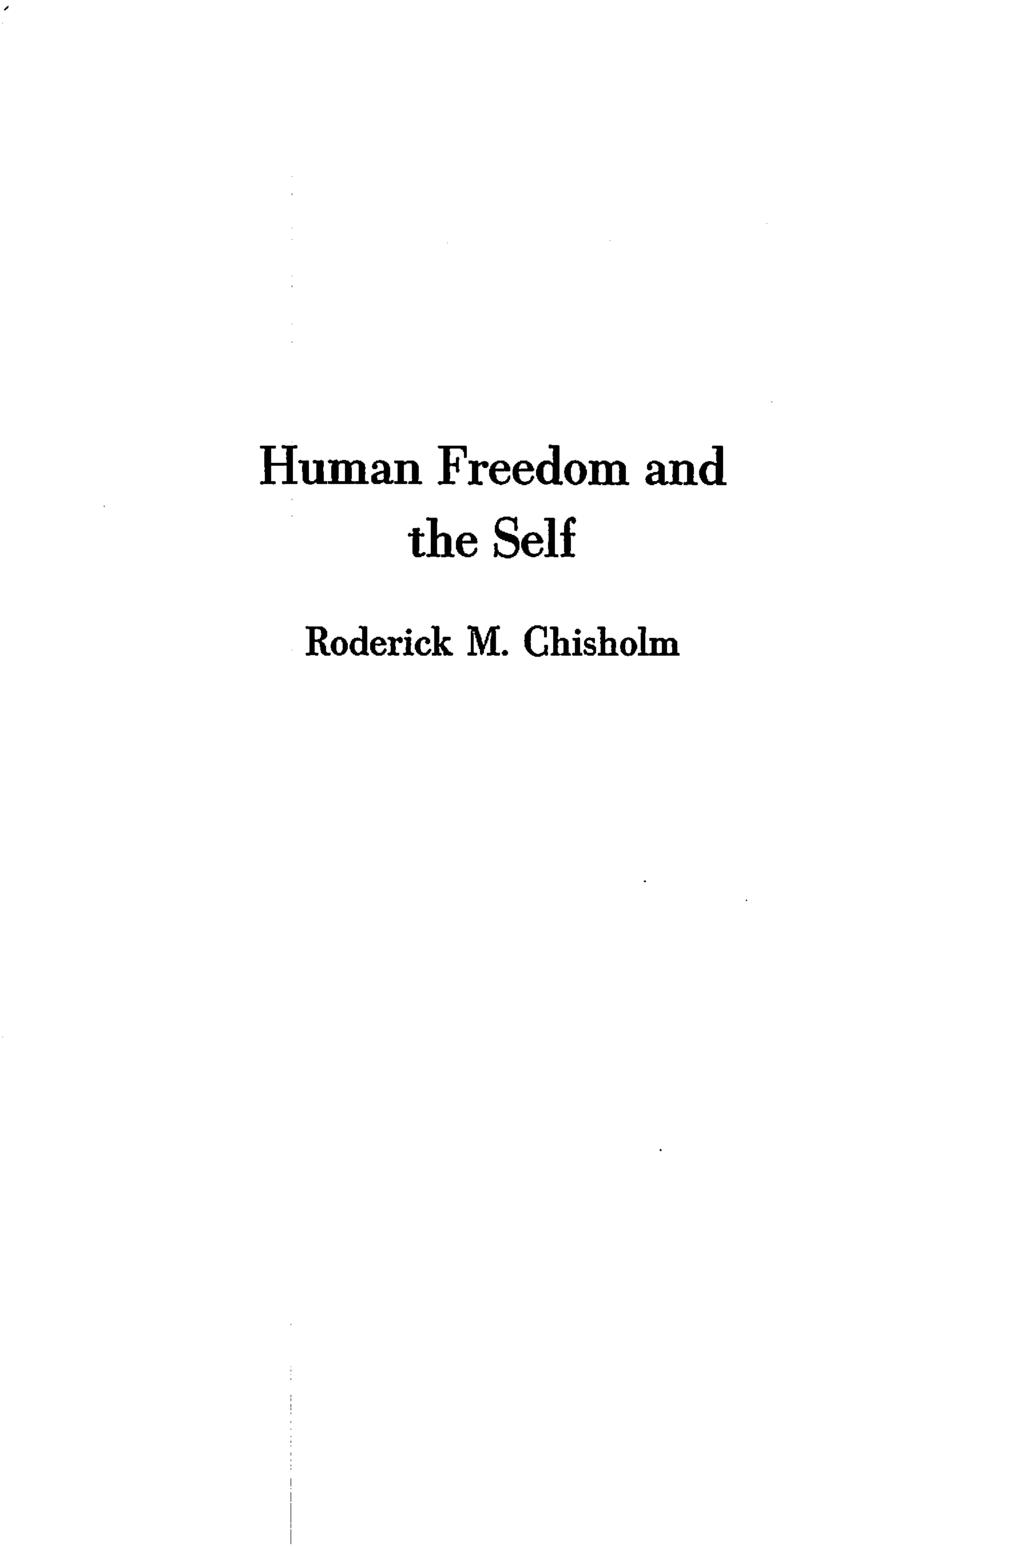 Human Freedom and the